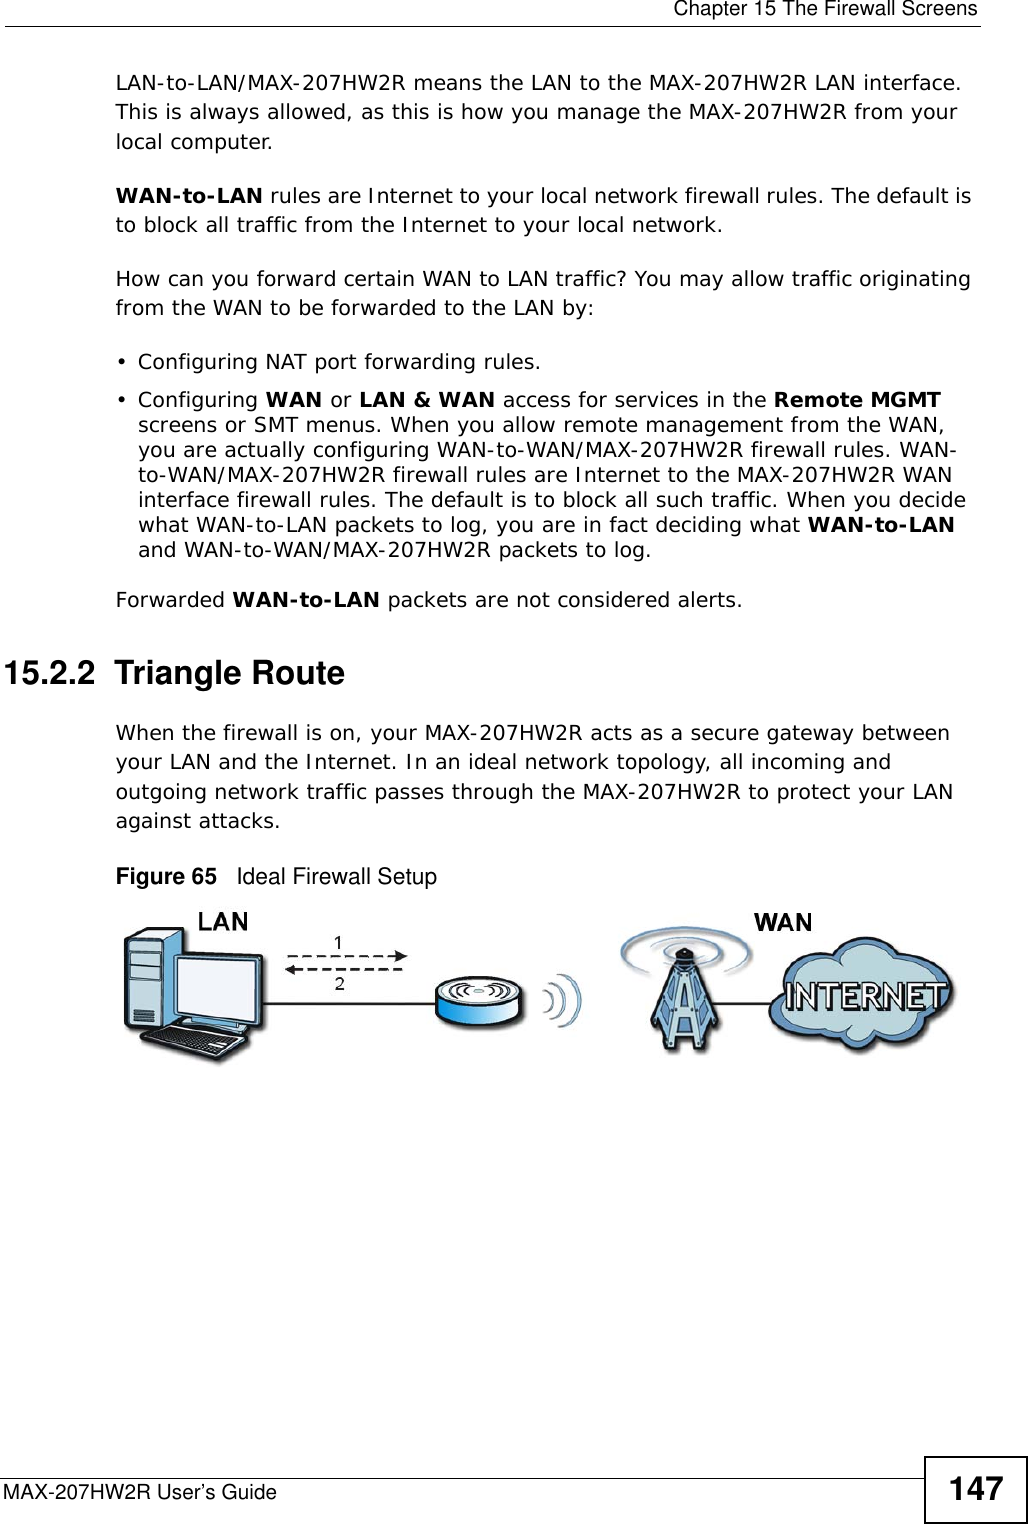  Chapter 15 The Firewall ScreensMAX-207HW2R User’s Guide 147LAN-to-LAN/MAX-207HW2R means the LAN to the MAX-207HW2R LAN interface. This is always allowed, as this is how you manage the MAX-207HW2R from your local computer.WAN-to-LAN rules are Internet to your local network firewall rules. The default is to block all traffic from the Internet to your local network. How can you forward certain WAN to LAN traffic? You may allow traffic originating from the WAN to be forwarded to the LAN by:• Configuring NAT port forwarding rules.•Configuring WAN or LAN &amp; WAN access for services in the Remote MGMT screens or SMT menus. When you allow remote management from the WAN, you are actually configuring WAN-to-WAN/MAX-207HW2R firewall rules. WAN-to-WAN/MAX-207HW2R firewall rules are Internet to the MAX-207HW2R WAN interface firewall rules. The default is to block all such traffic. When you decide what WAN-to-LAN packets to log, you are in fact deciding what WAN-to-LAN and WAN-to-WAN/MAX-207HW2R packets to log. Forwarded WAN-to-LAN packets are not considered alerts.15.2.2  Triangle RouteWhen the firewall is on, your MAX-207HW2R acts as a secure gateway between your LAN and the Internet. In an ideal network topology, all incoming and outgoing network traffic passes through the MAX-207HW2R to protect your LAN against attacks.Figure 65   Ideal Firewall Setup